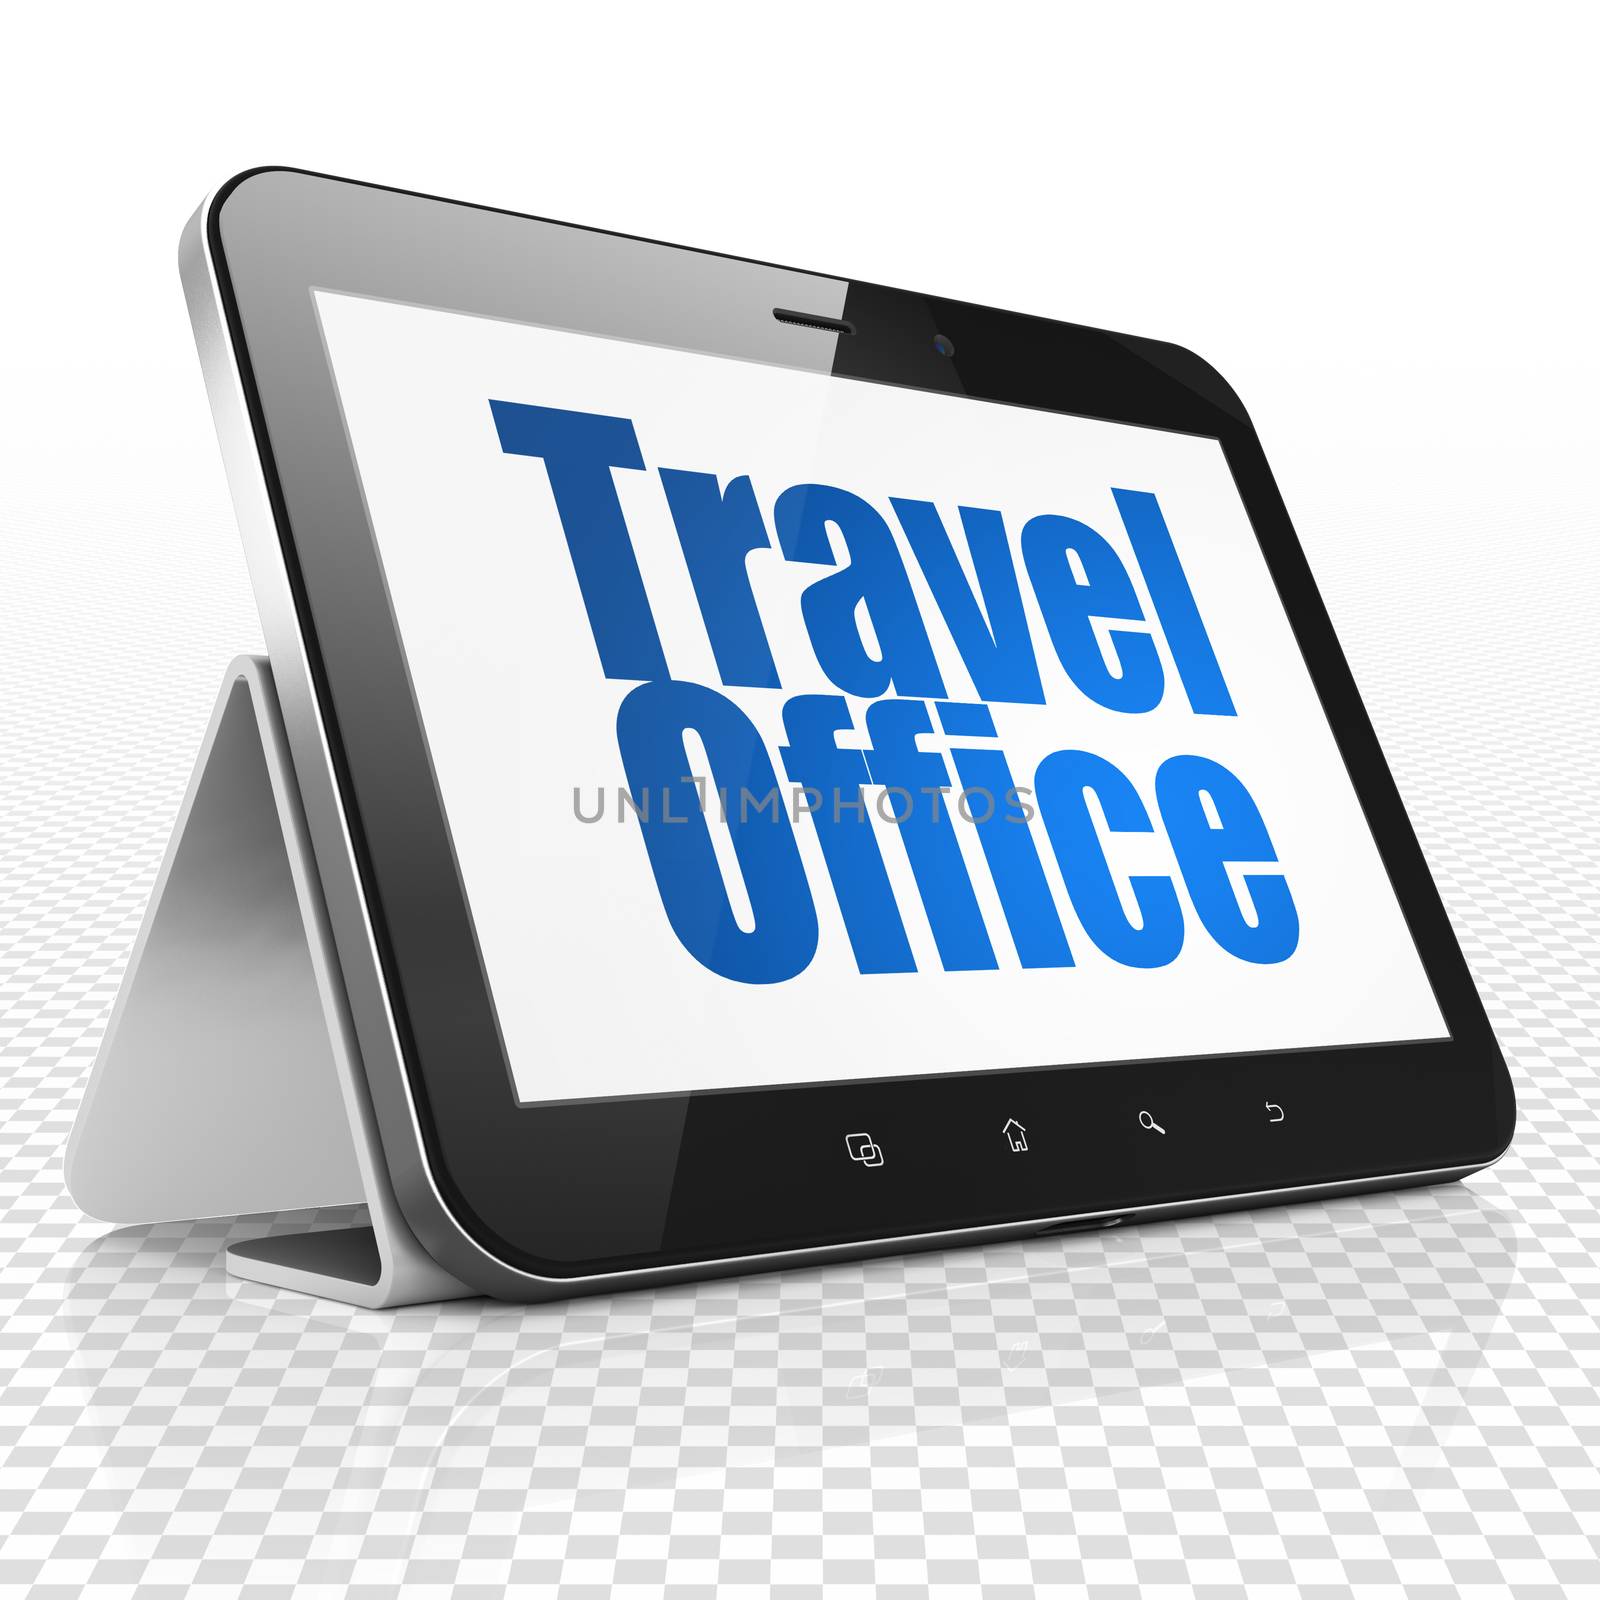 Travel concept: Tablet Computer with blue text Travel Office on display, 3D rendering